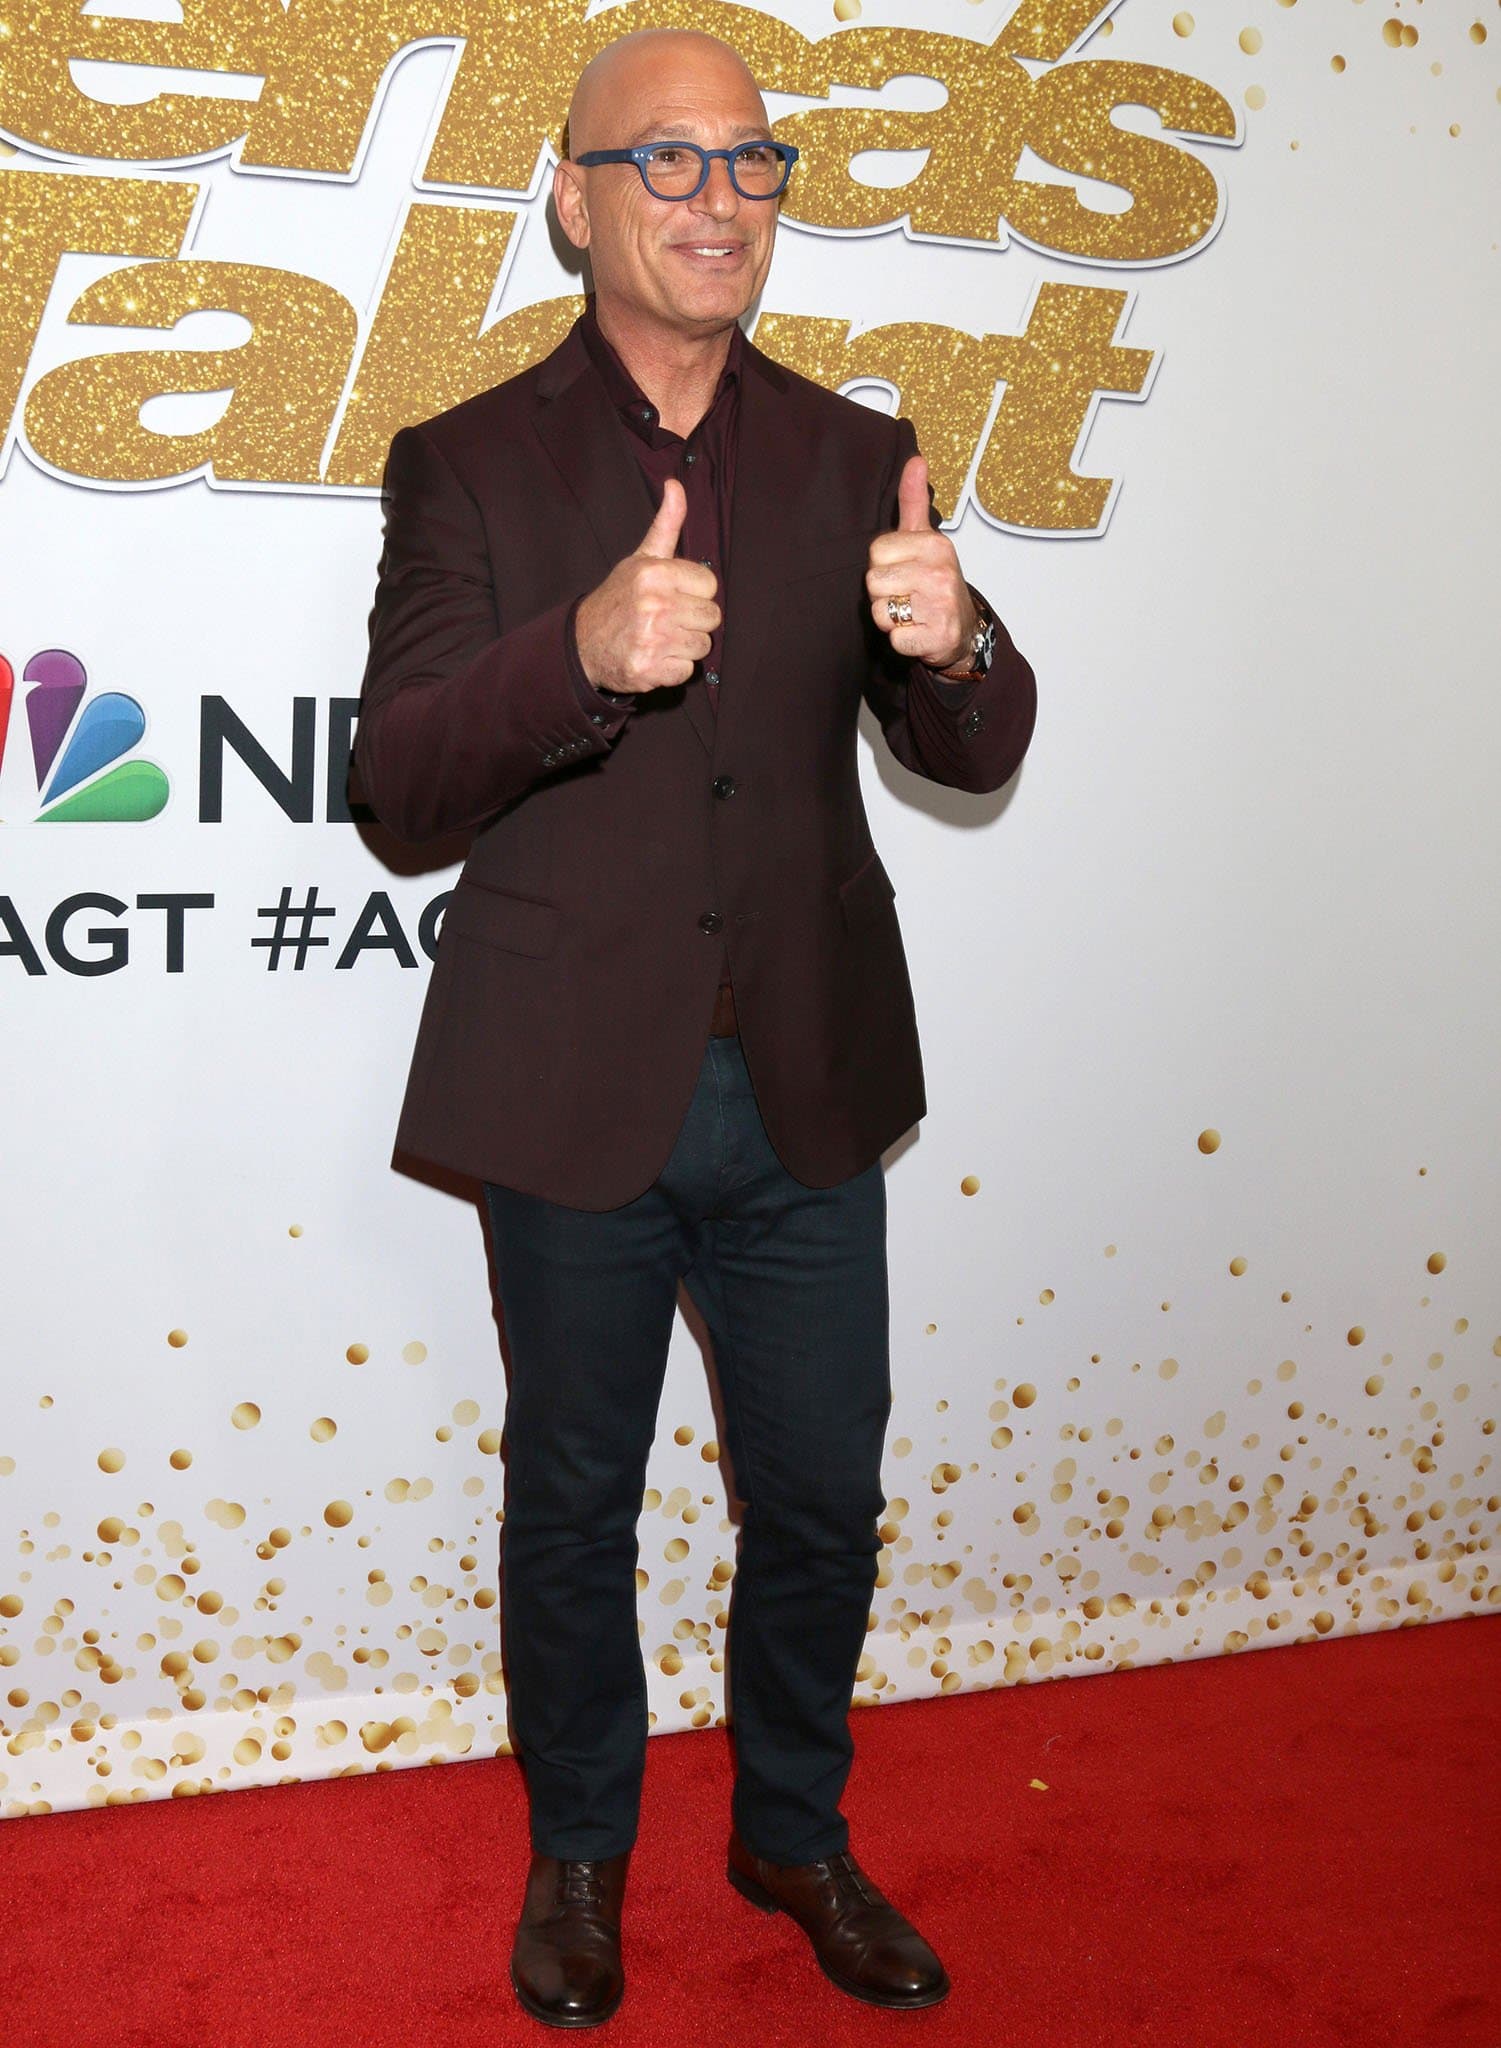 Howie Mandel has been in the industry since the early 1980s and has amassed a net worth of $60 million